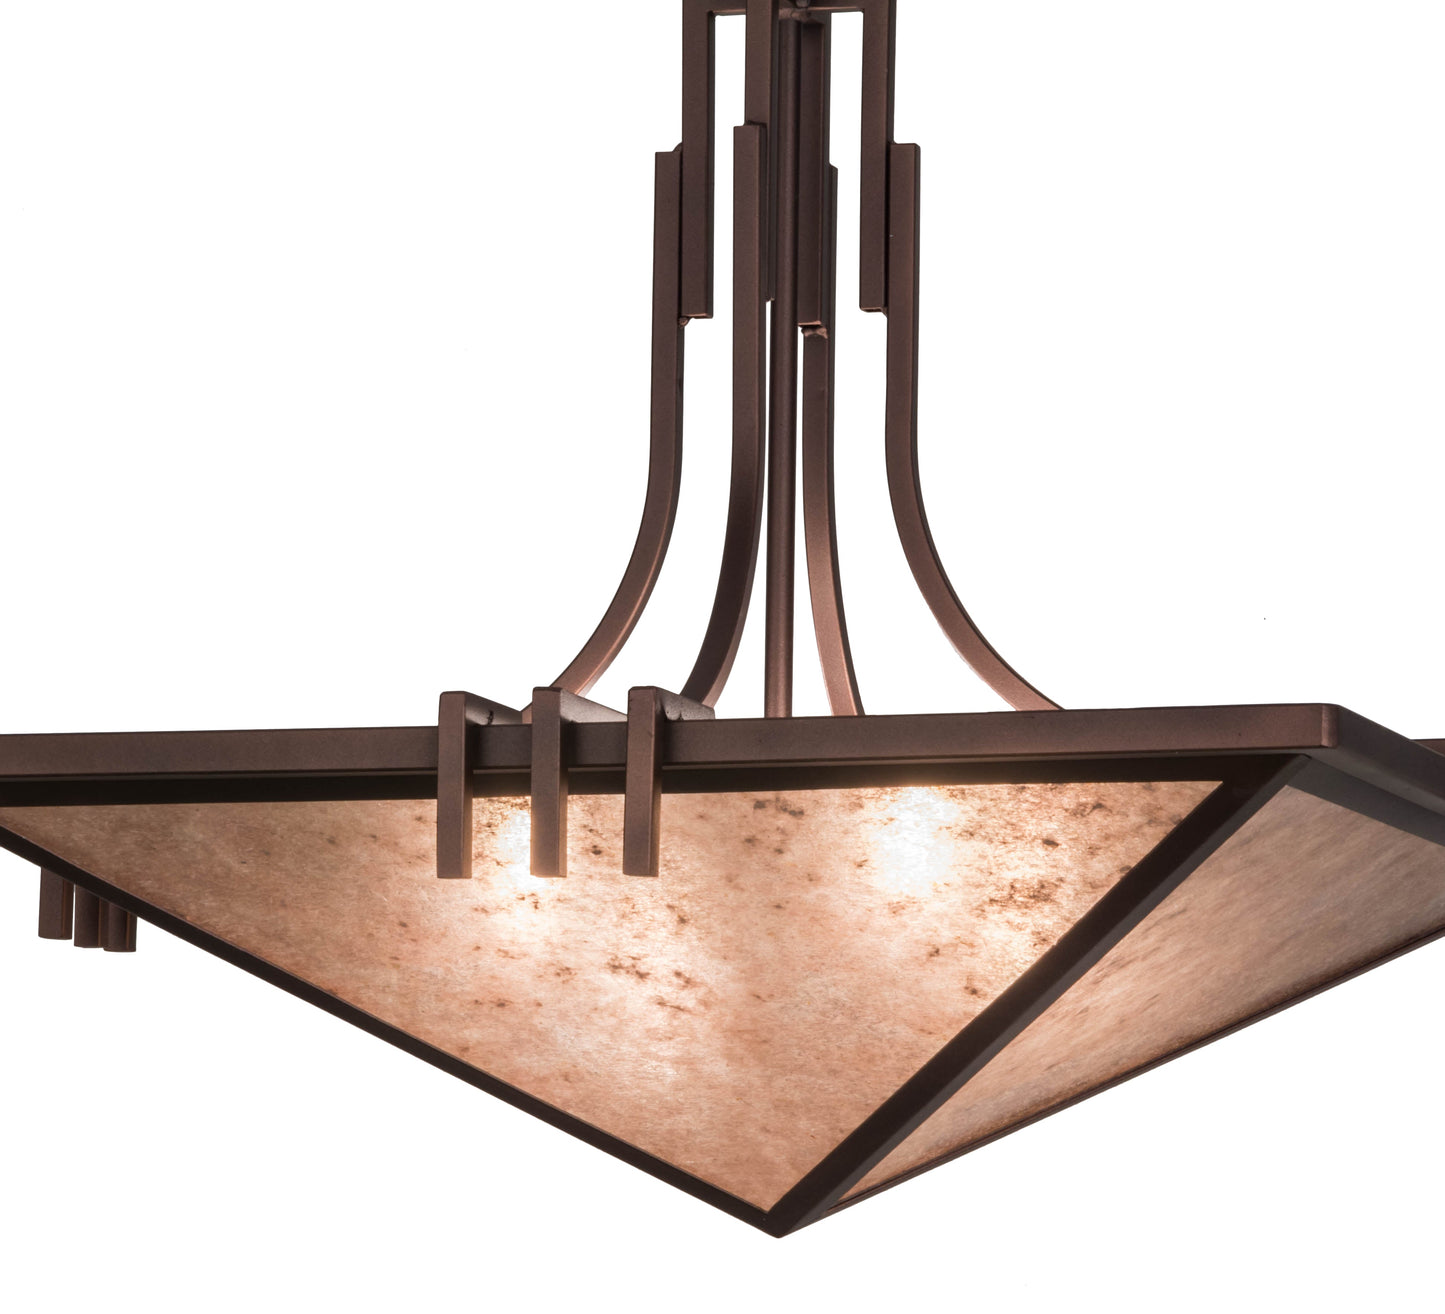 27" Square Lineage Inverted Pendant by 2nd Ave Lighting